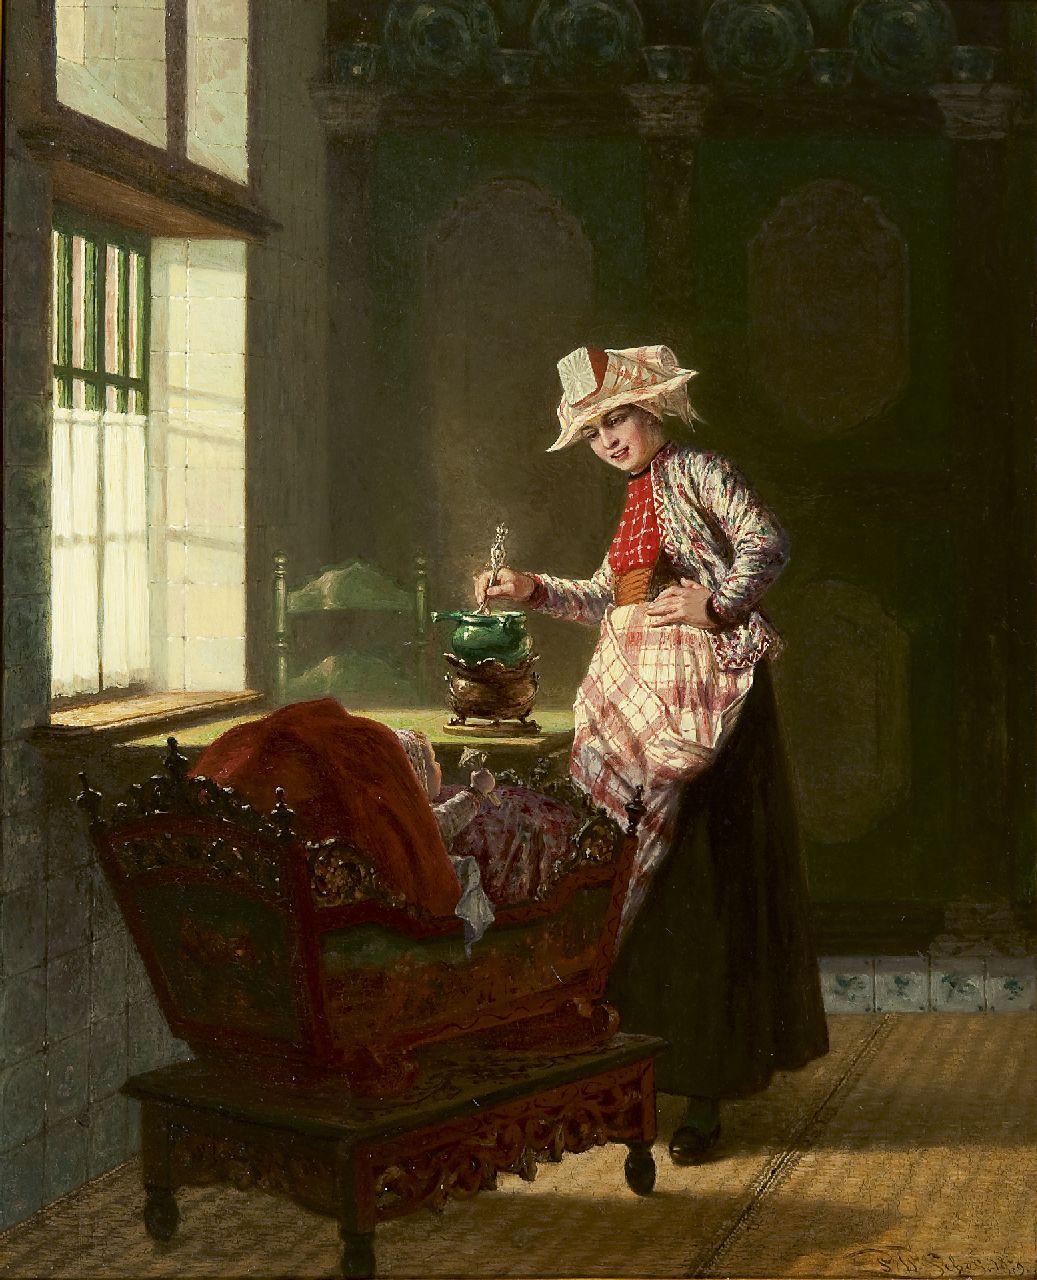 Sebes P.W.  | Pieter Willem Sebes, An interior in Hindeloopen with mother and child, oil on panel 55.9 x 45.3 cm, signed l.r. and dated 1879